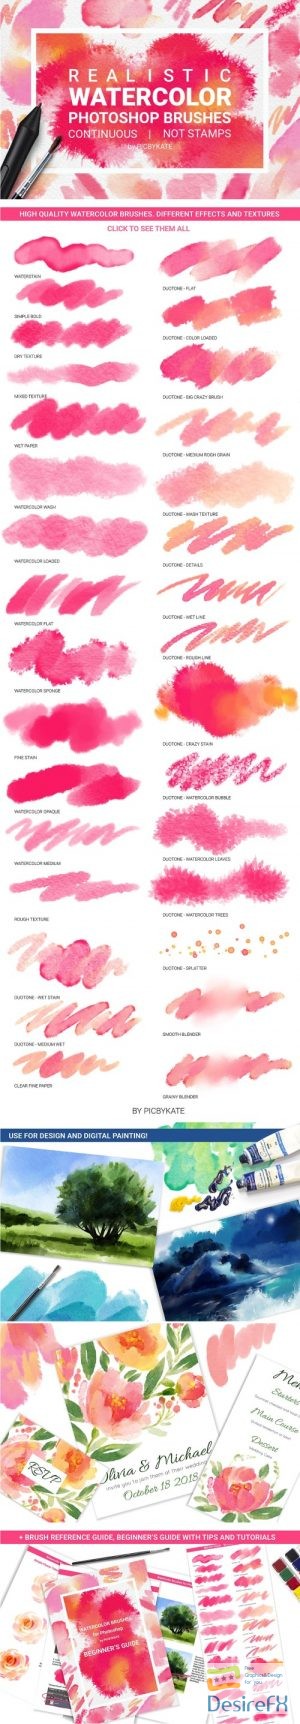 CM - Watercolor Photoshop Brushes - 1409118